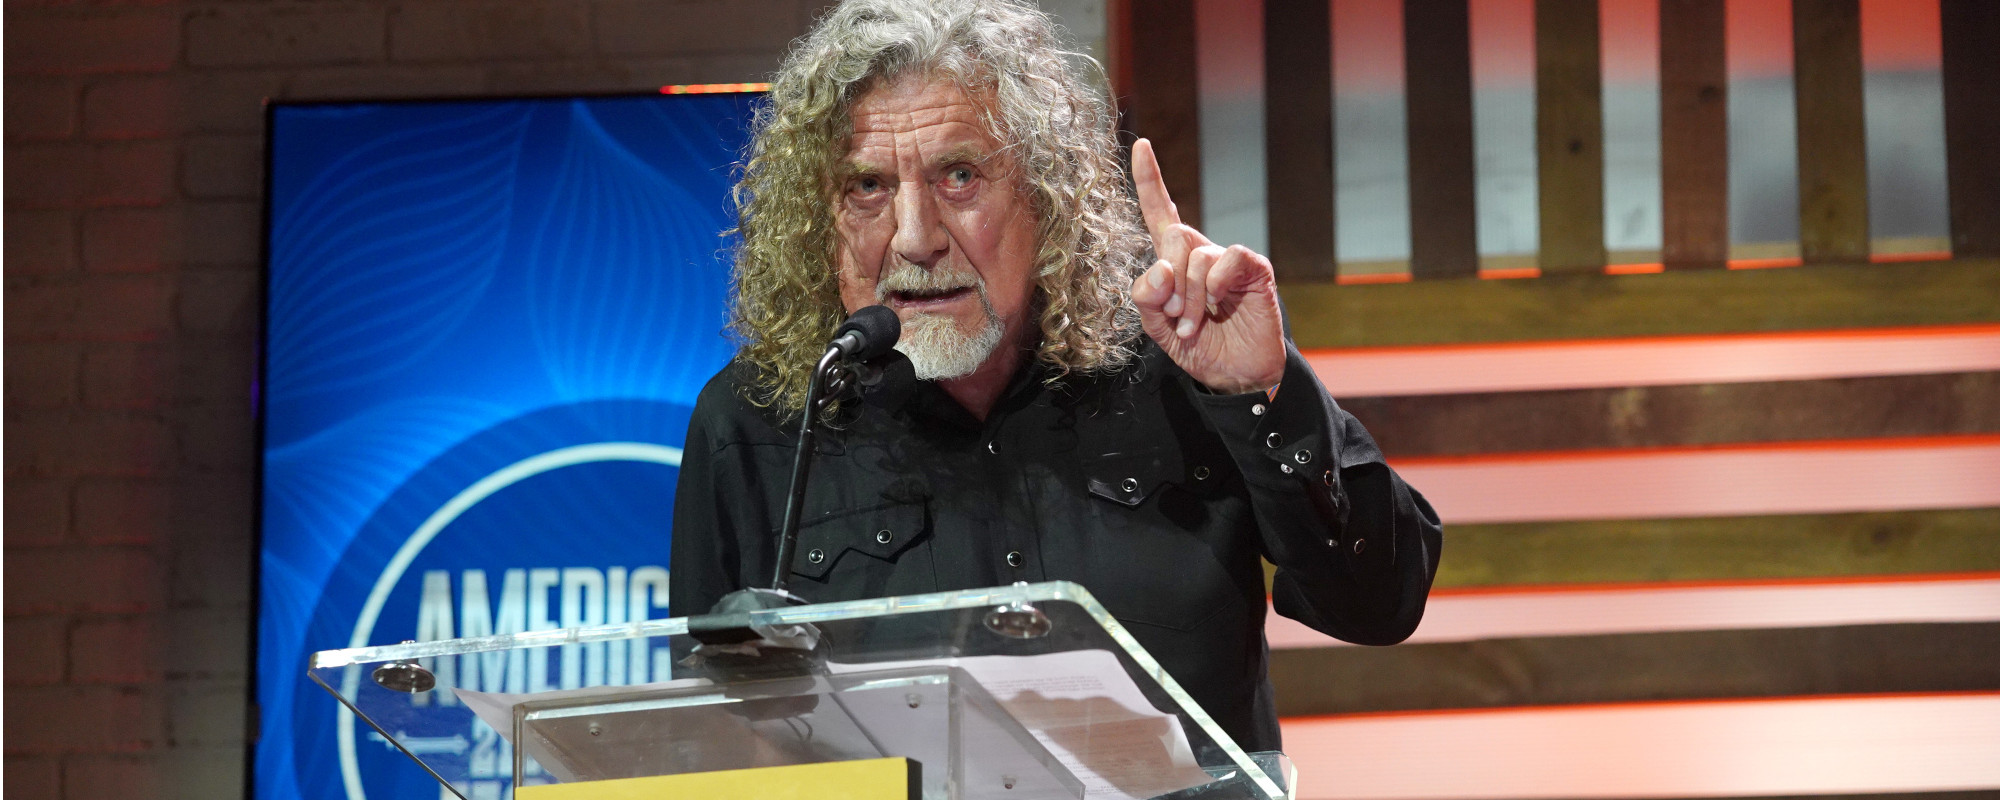 The Led Zeppelin Classic Robert Plant Will “Probably” Never Sing Again